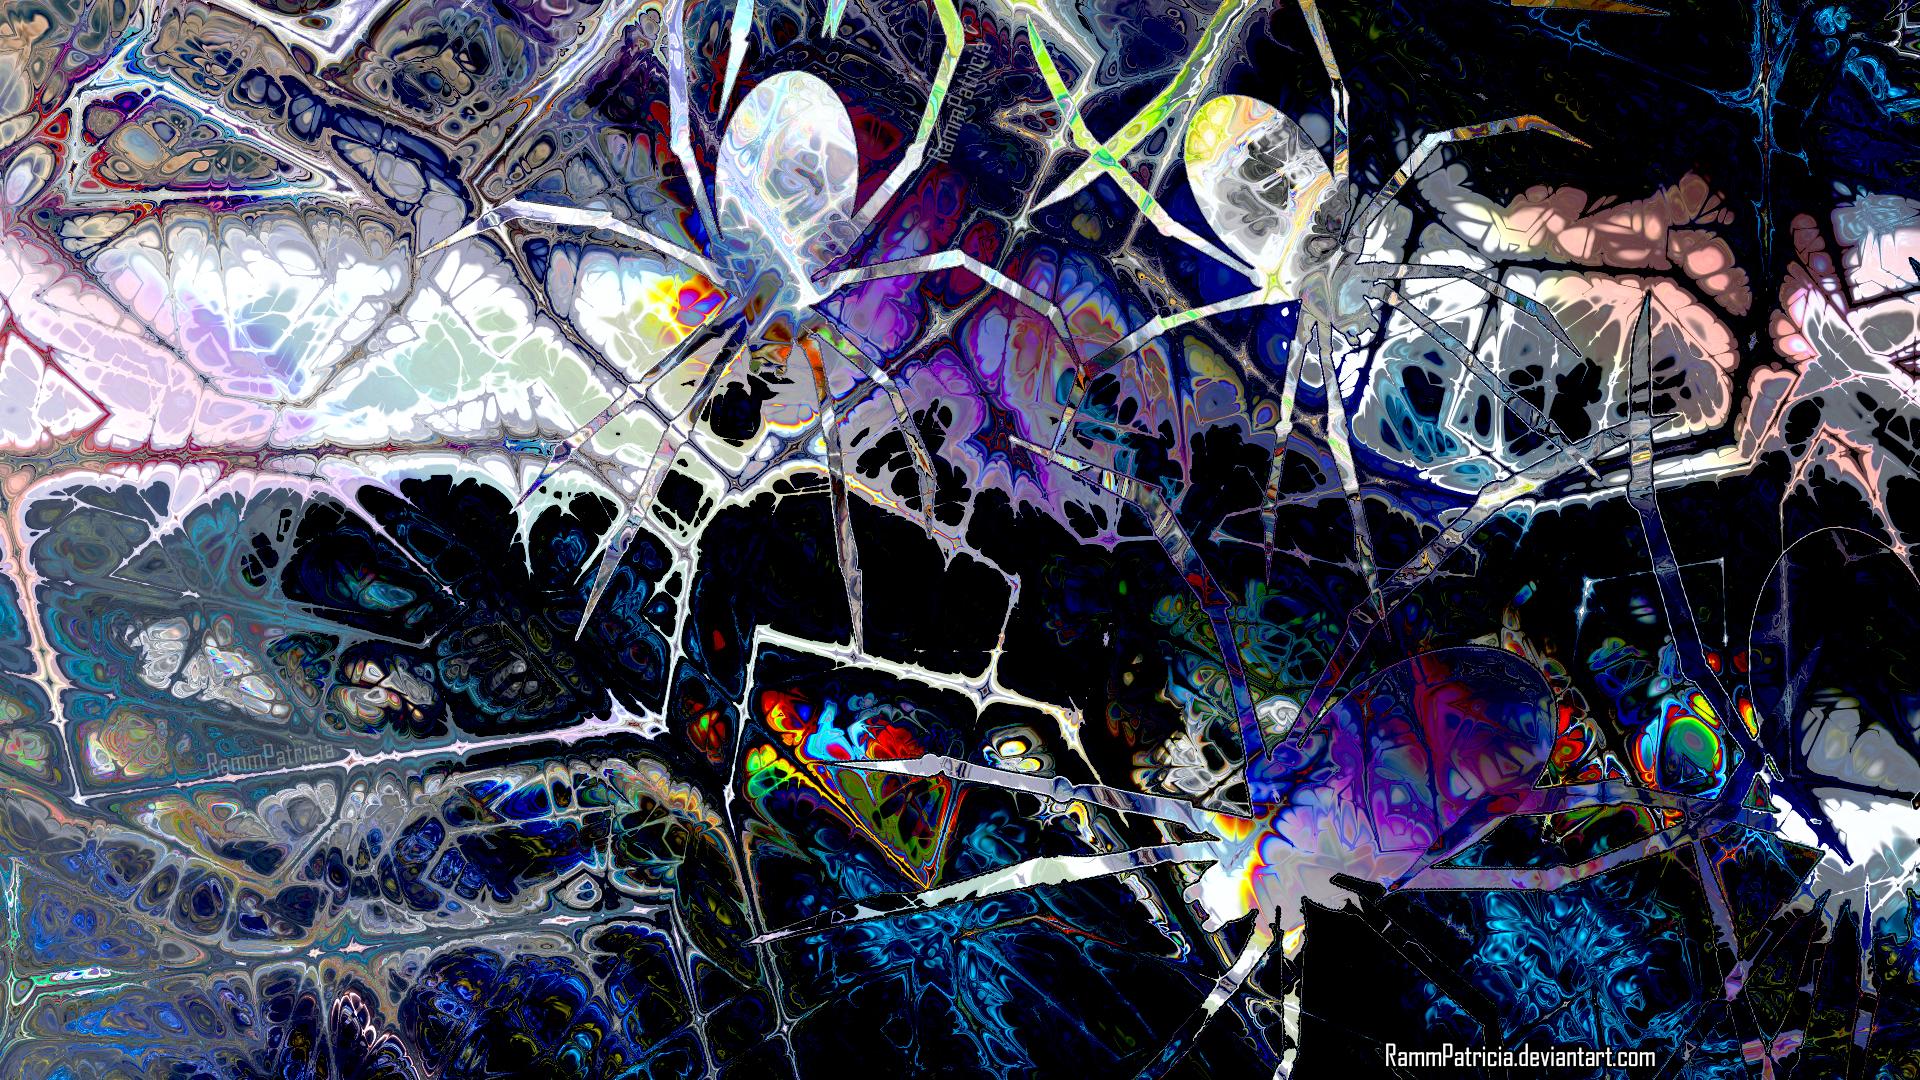 HD wallpaper, Iridescent, Tarantula, Spider, Psychedelic, Rammpatricia, Trippy, Colorful, Watermarked, Abstract, Digital Art